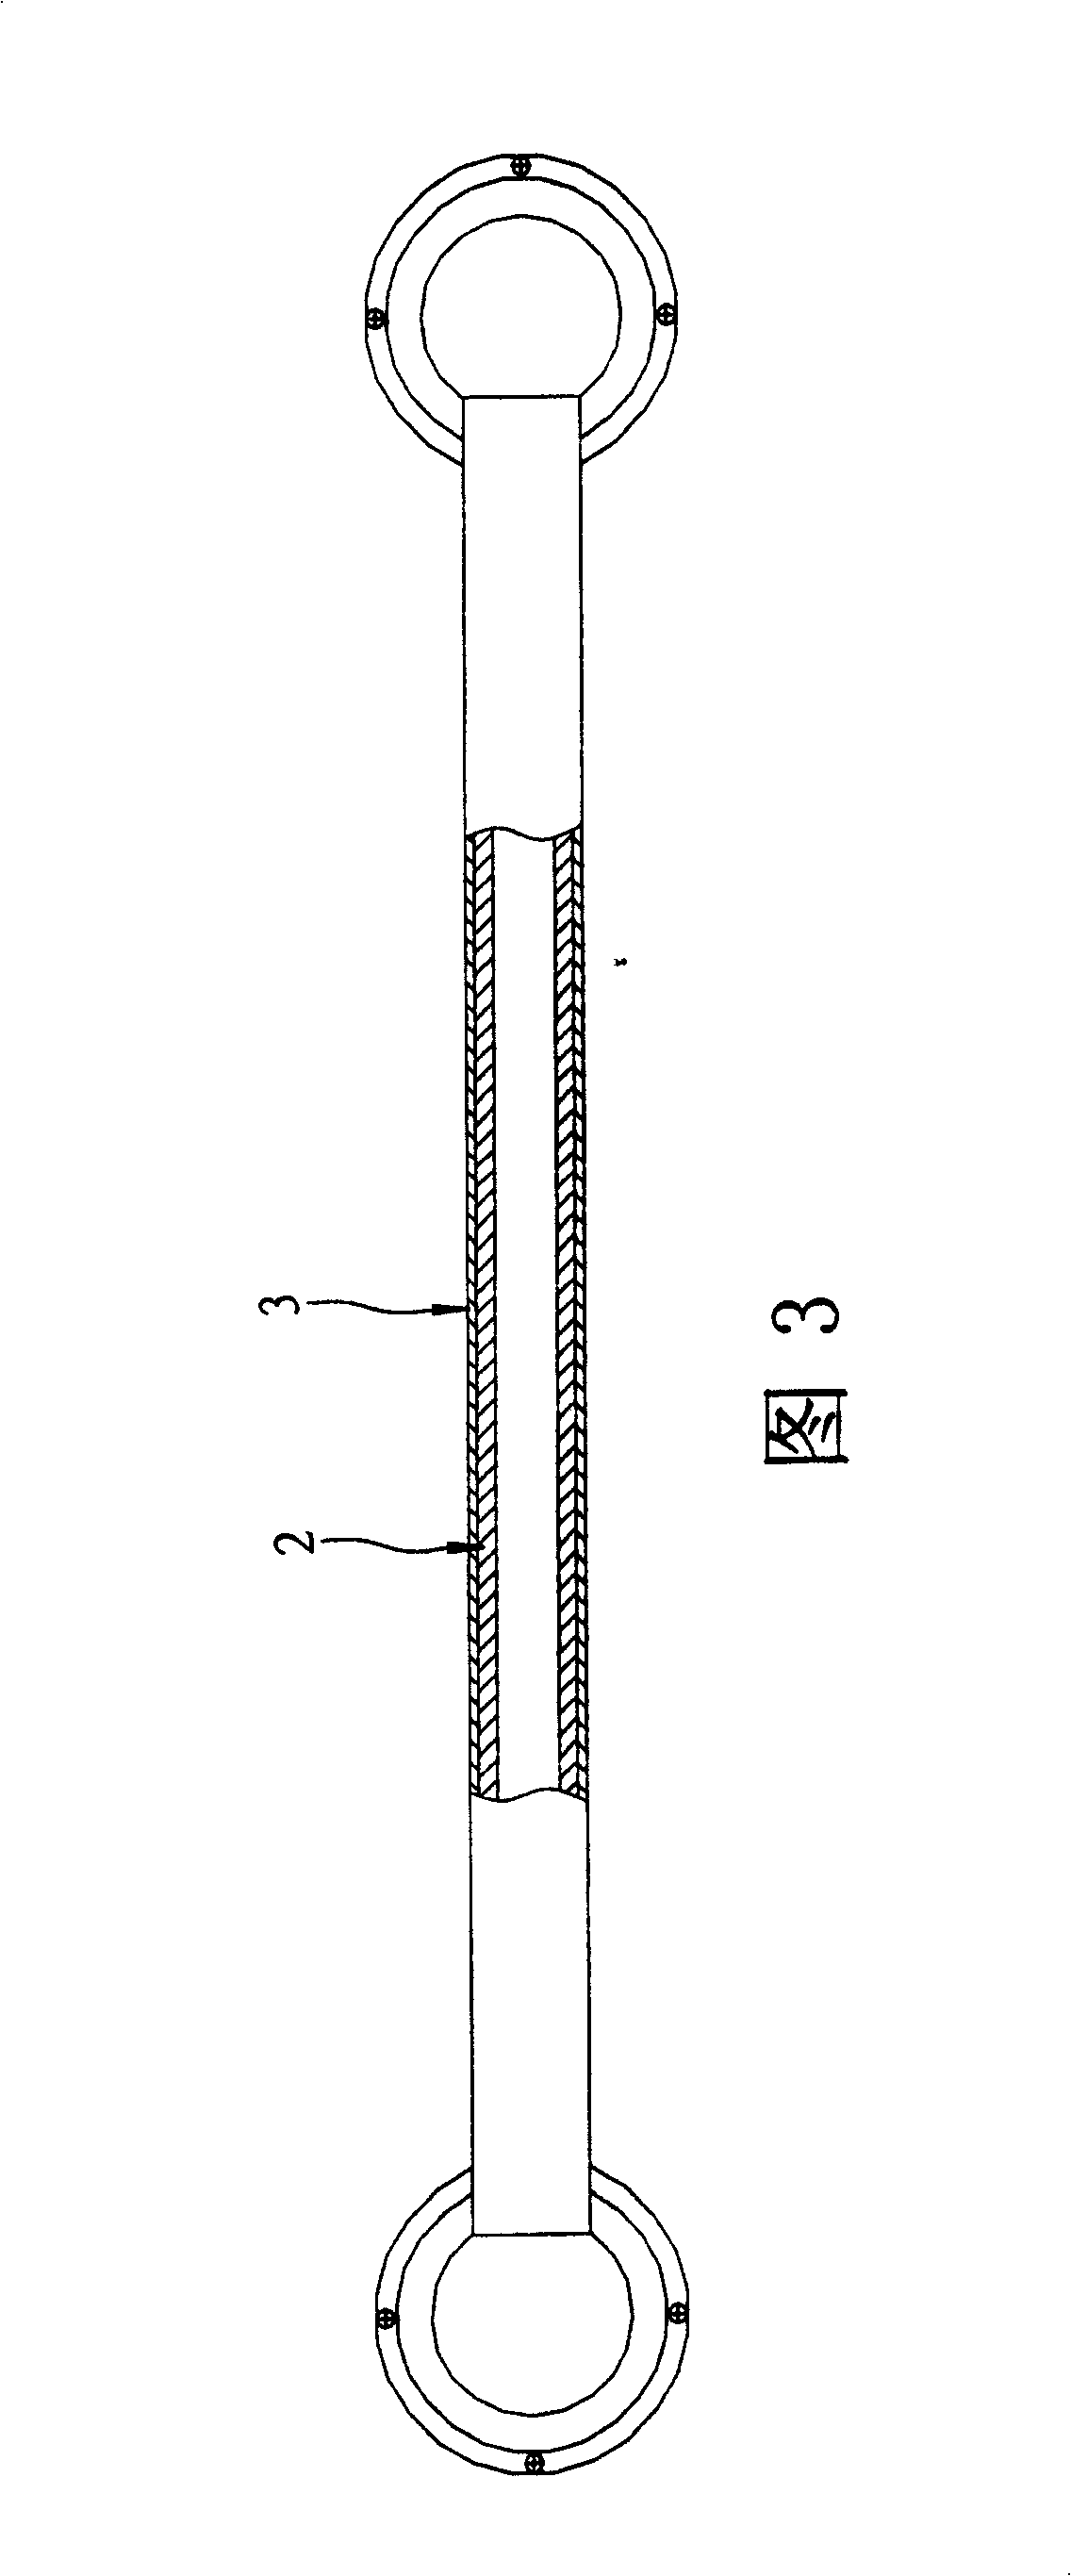 Production of bathing products with surface antibacterial membrane and products thereof